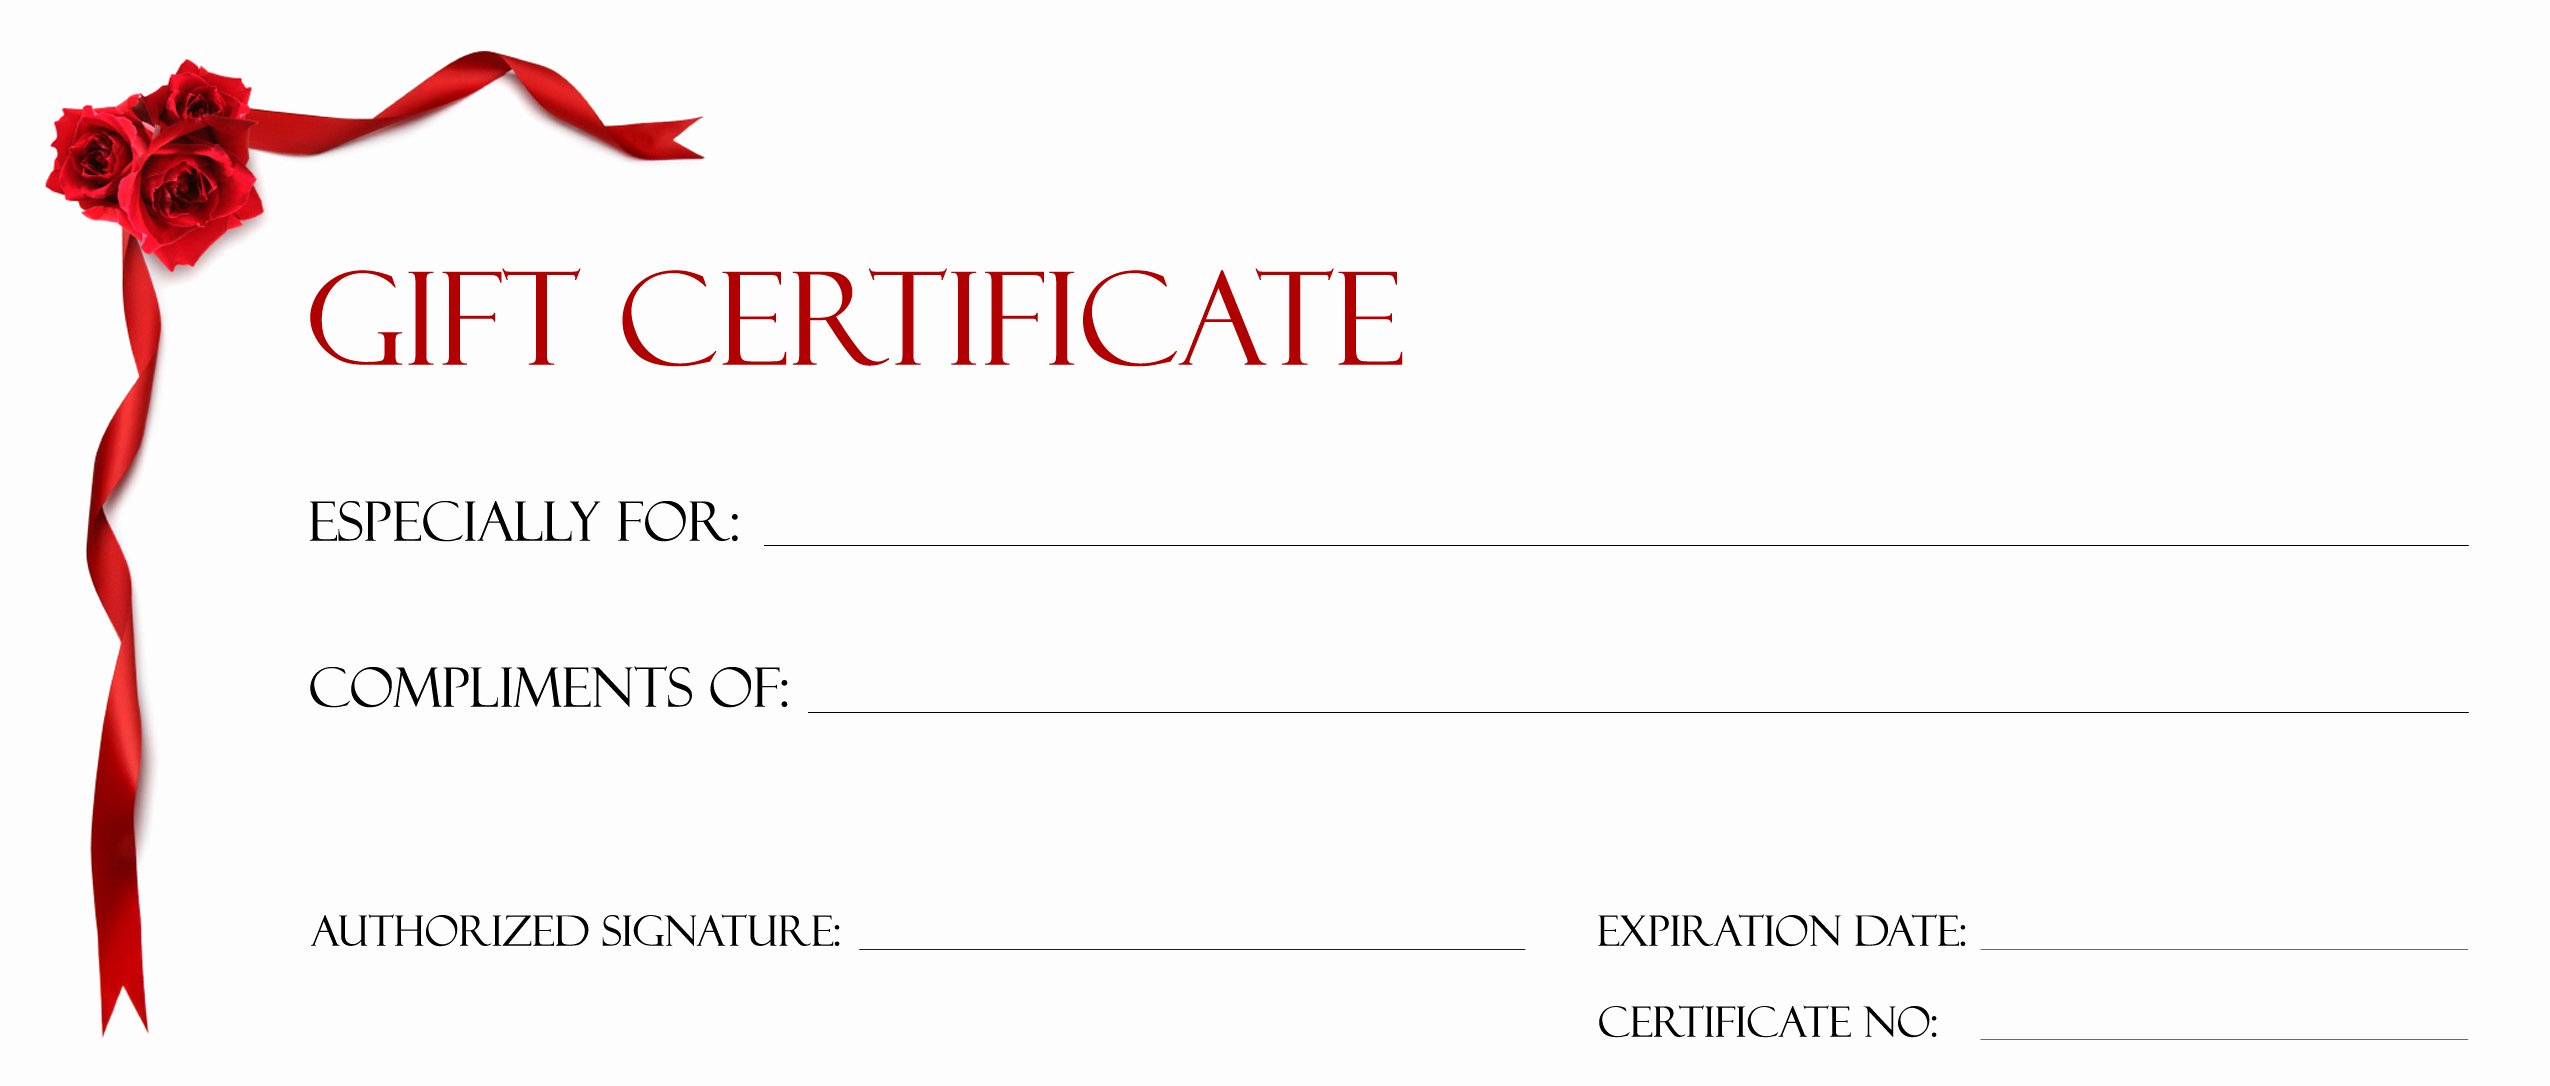 t certificate make your own